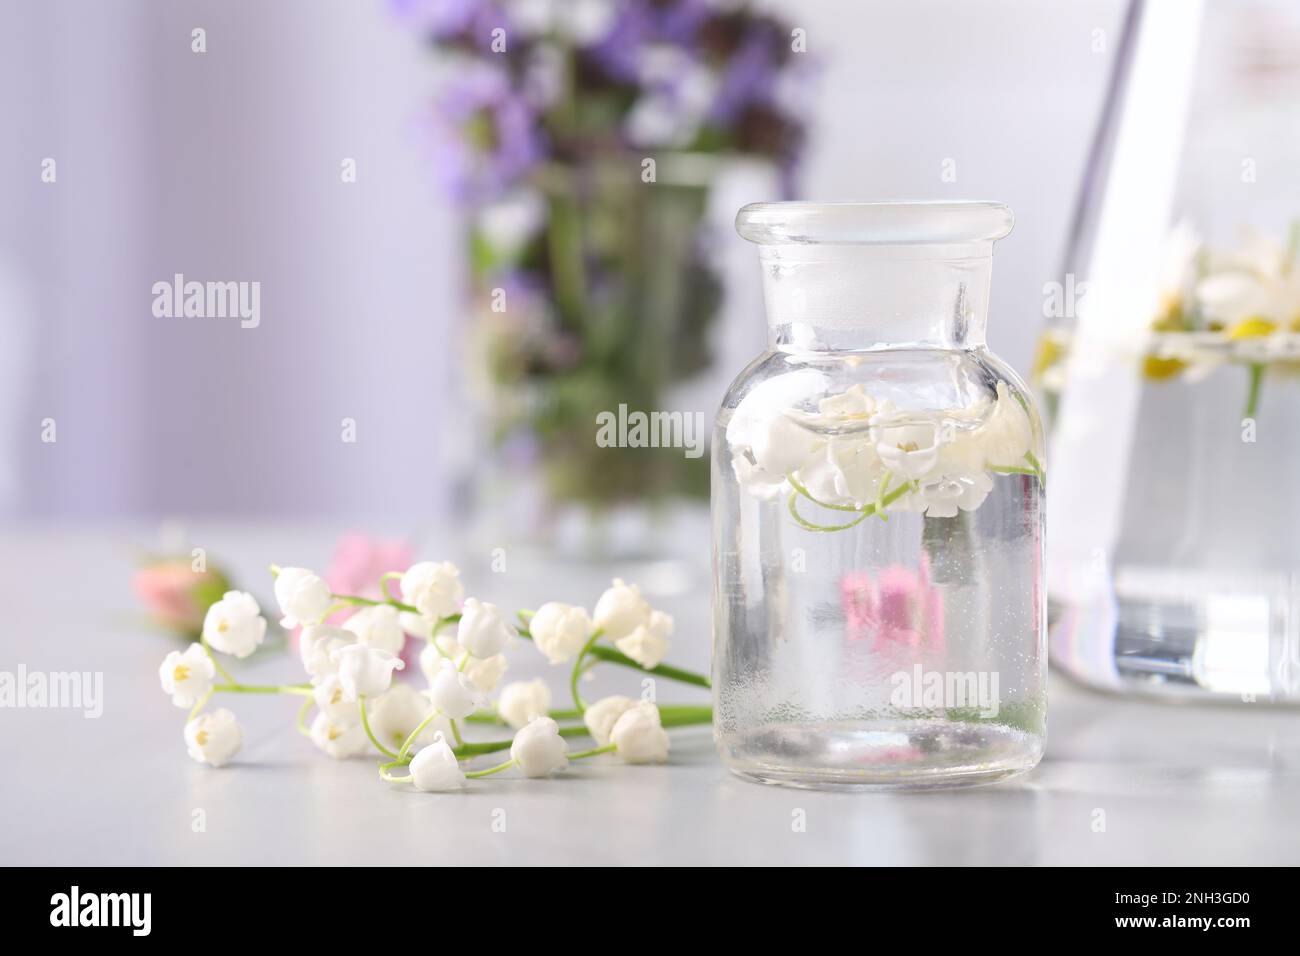 Lily of the valley, essential oil, extract, tincture, infusion, remedy,  herbal capsules. Fresh flowers Convallaria majalis 4518778 Stock Photo at  Vecteezy